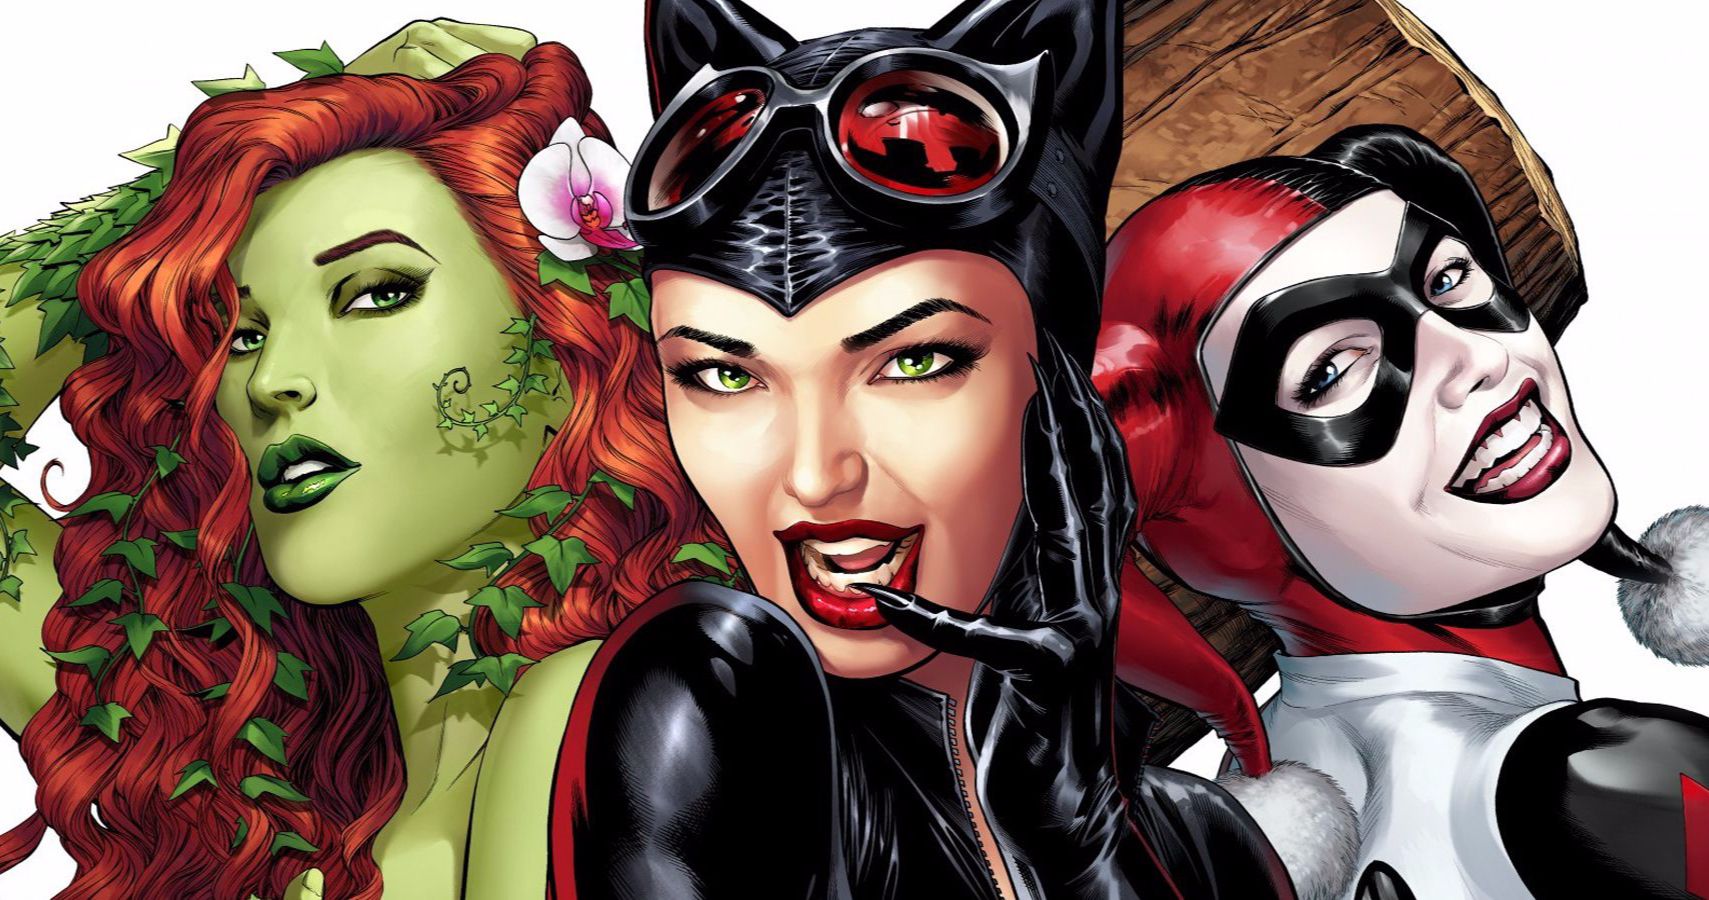 DC's Gotham City Sirens Is on Pause Says Suicide Squad Director